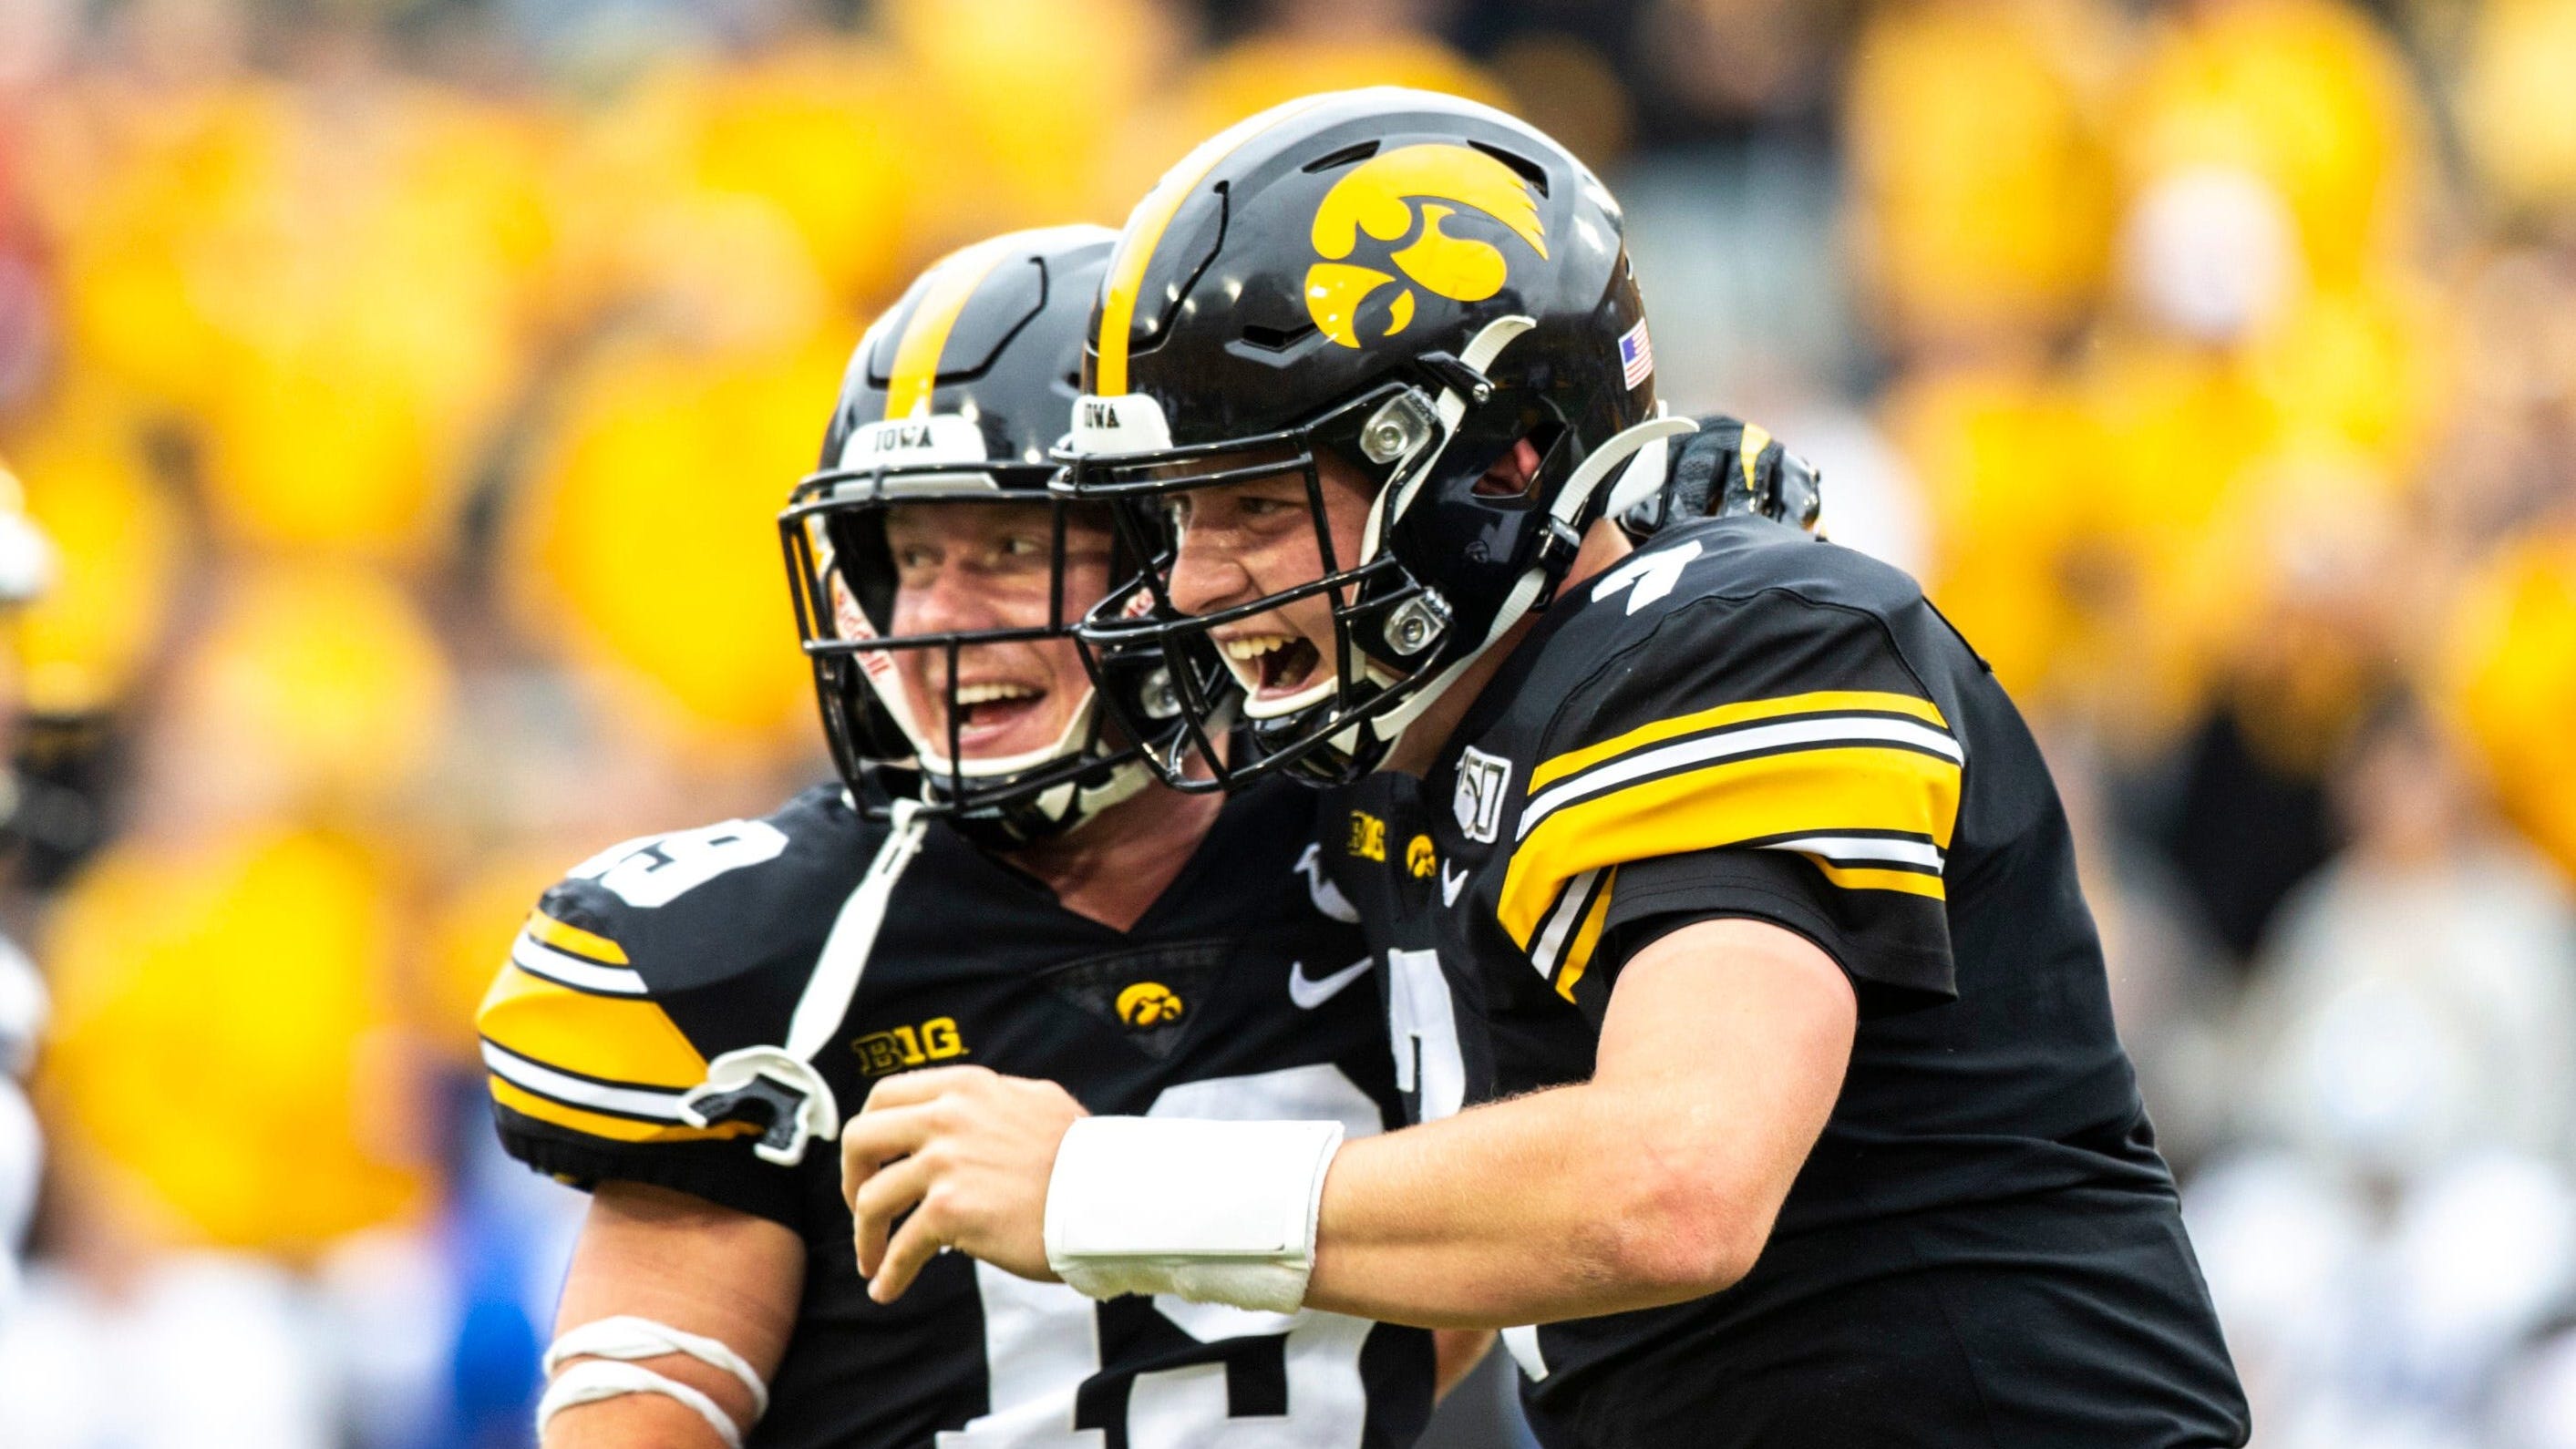 Iowa at Purdue odds, picks and prediction